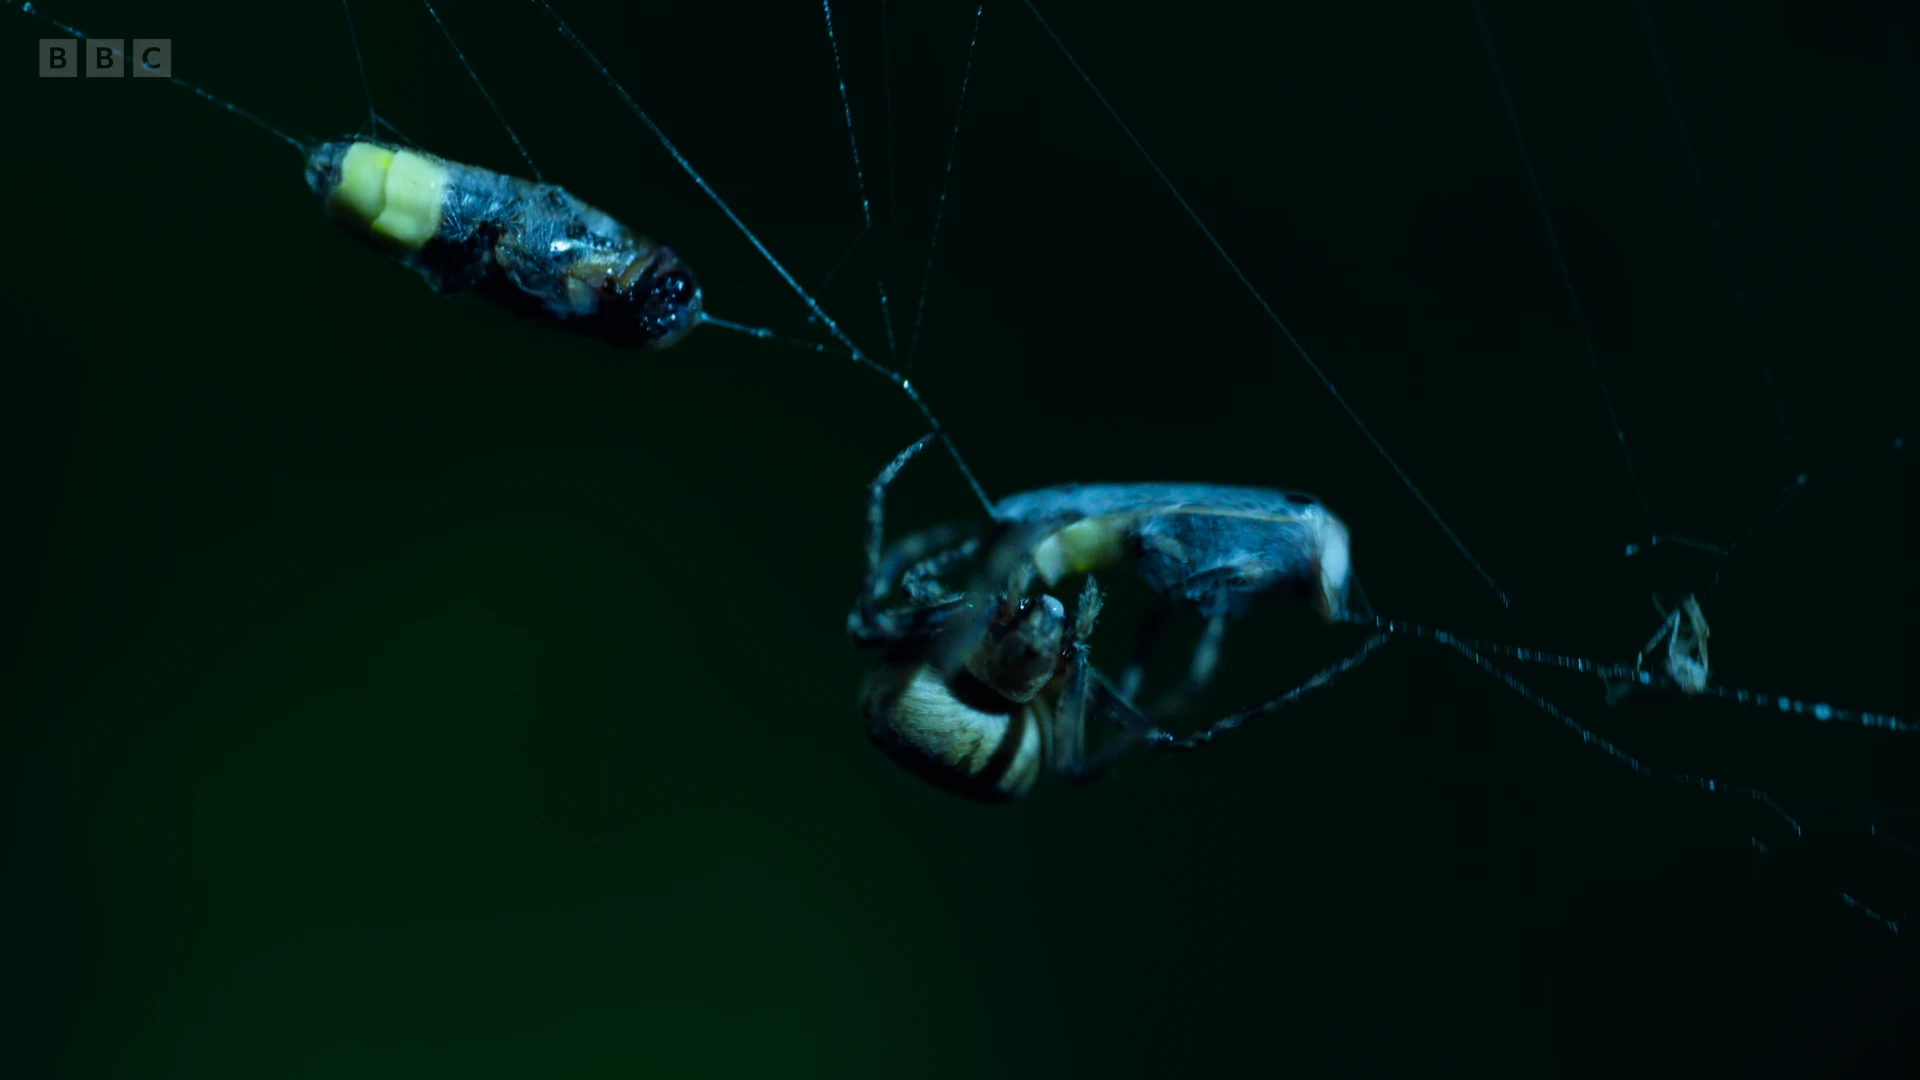 Humpbacked orb-weaver spider (Eustala anastera) as shown in Seven Worlds, One Planet - North America